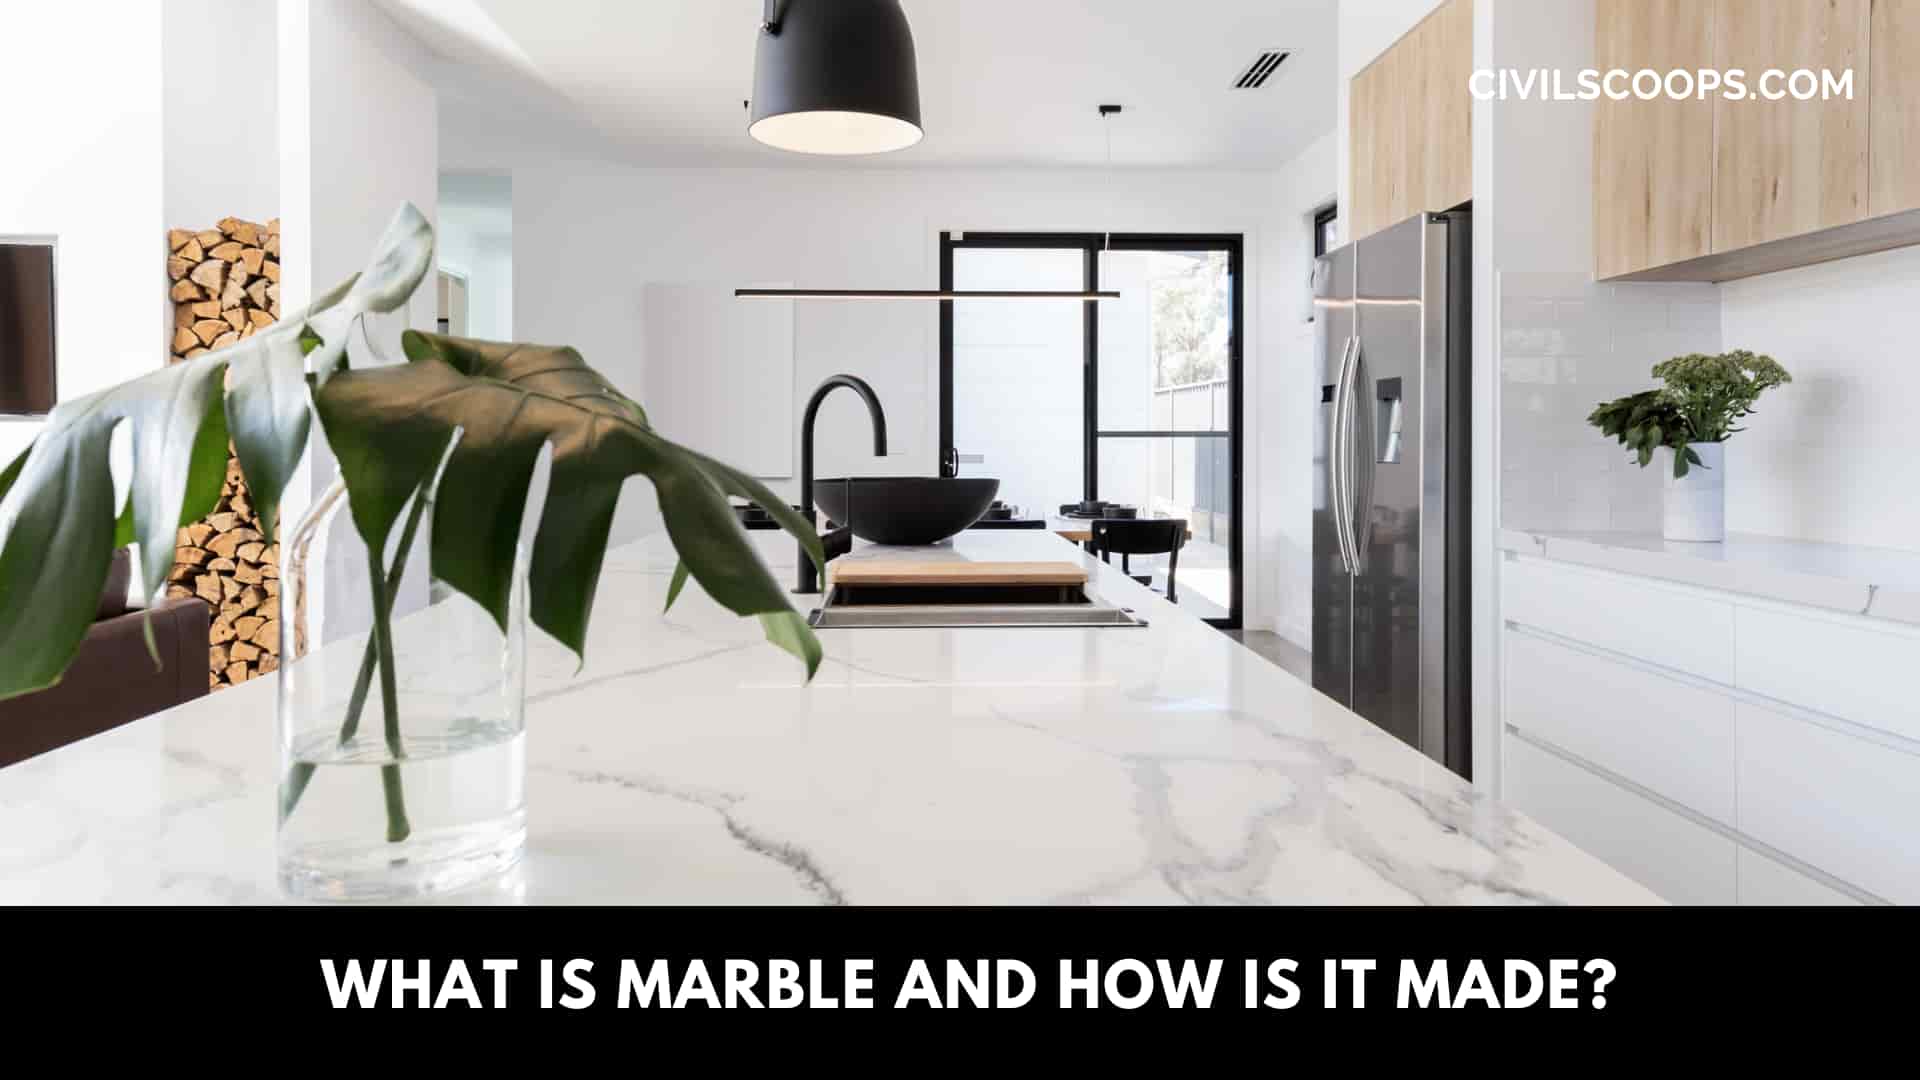 What Is Marble And How Is It Made?